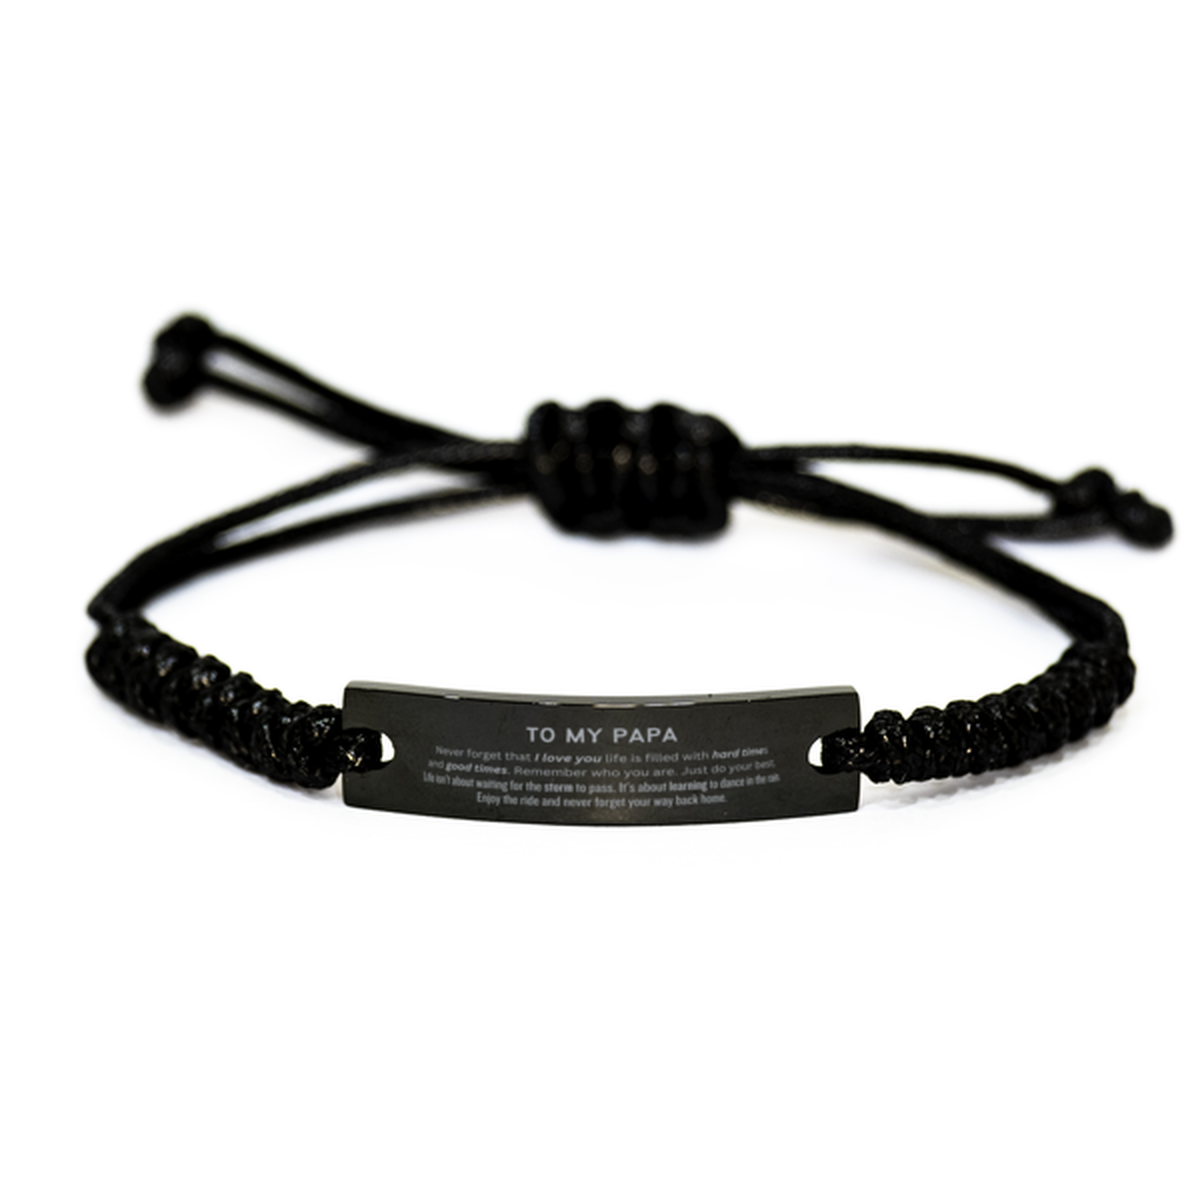 Christmas Papa Black Rope Bracelet Gifts, To My Papa Birthday Thank You Gifts For Papa, Graduation Unique Gifts For Papa To My Papa Never forget that I love you life is filled with hard times and good times. Remember who you are. Just do your best